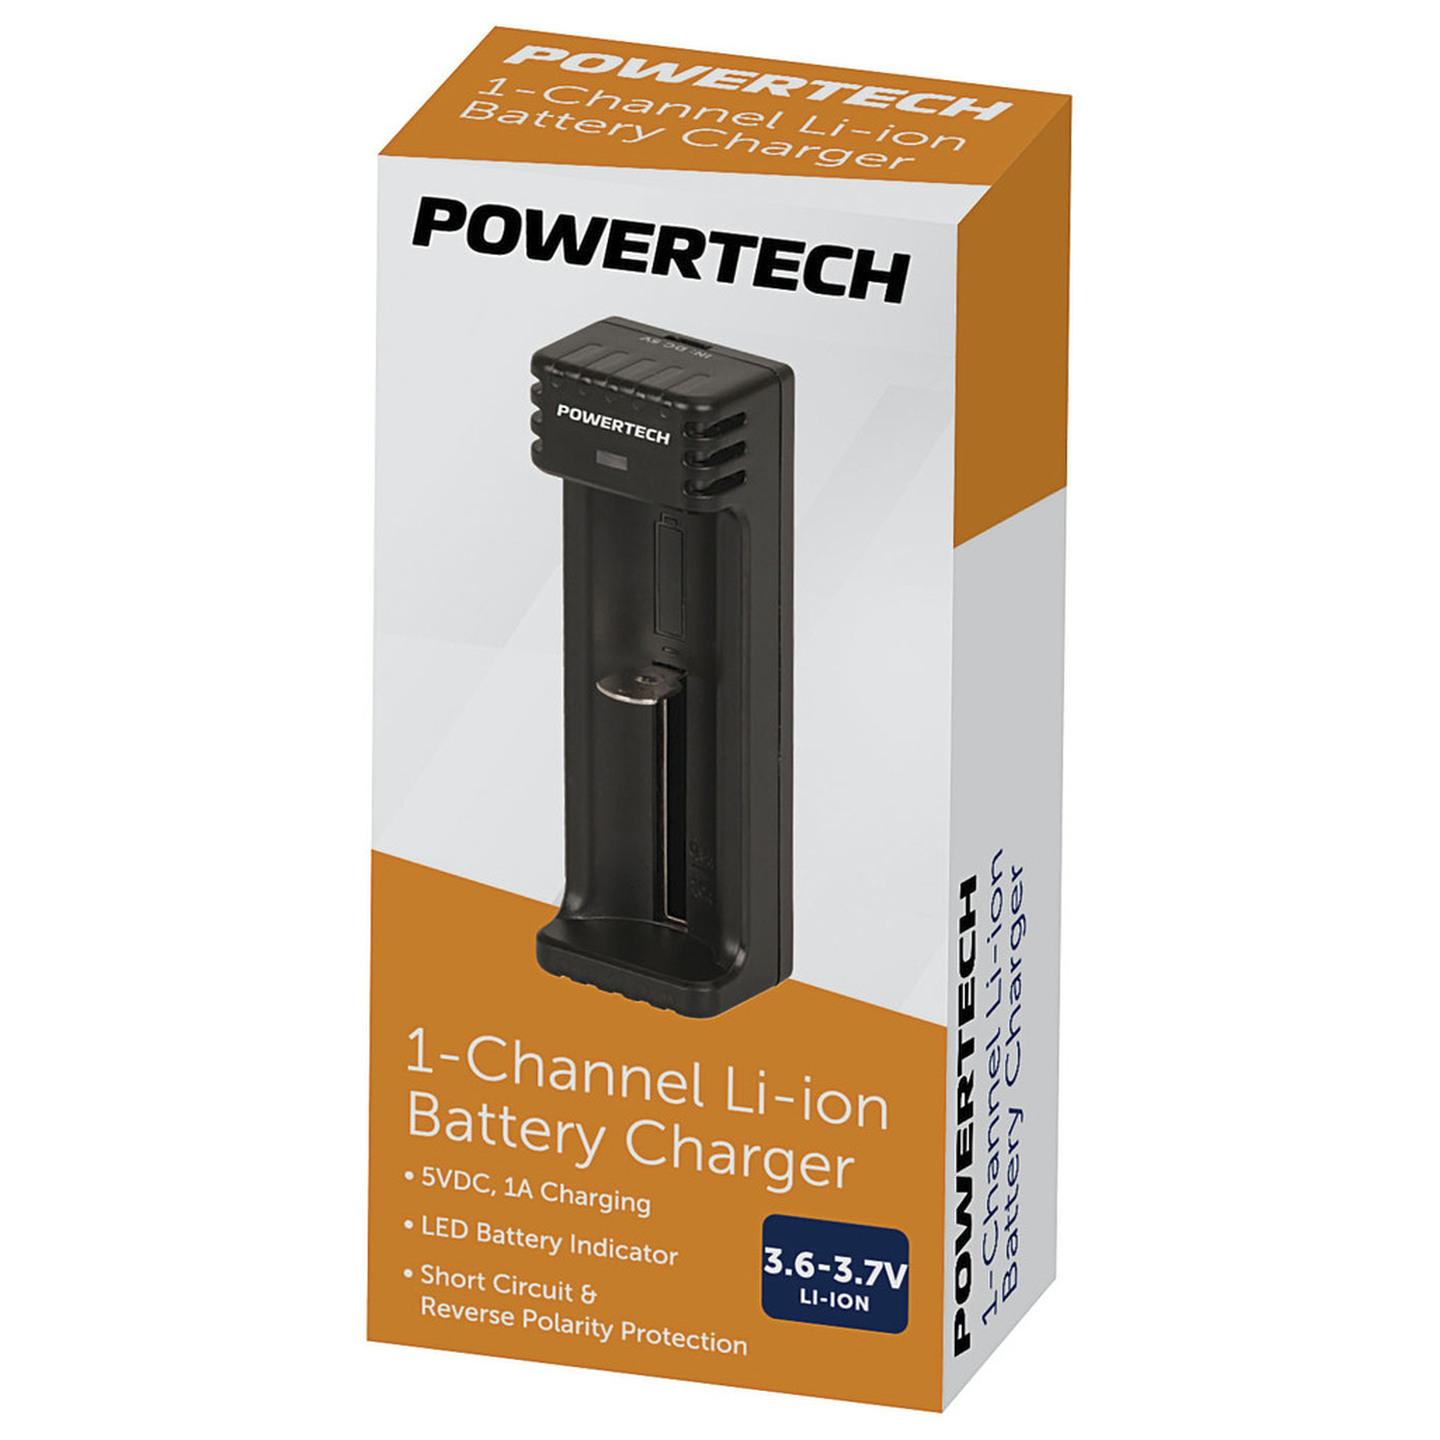 Single Channel Li-ion Battery Charger